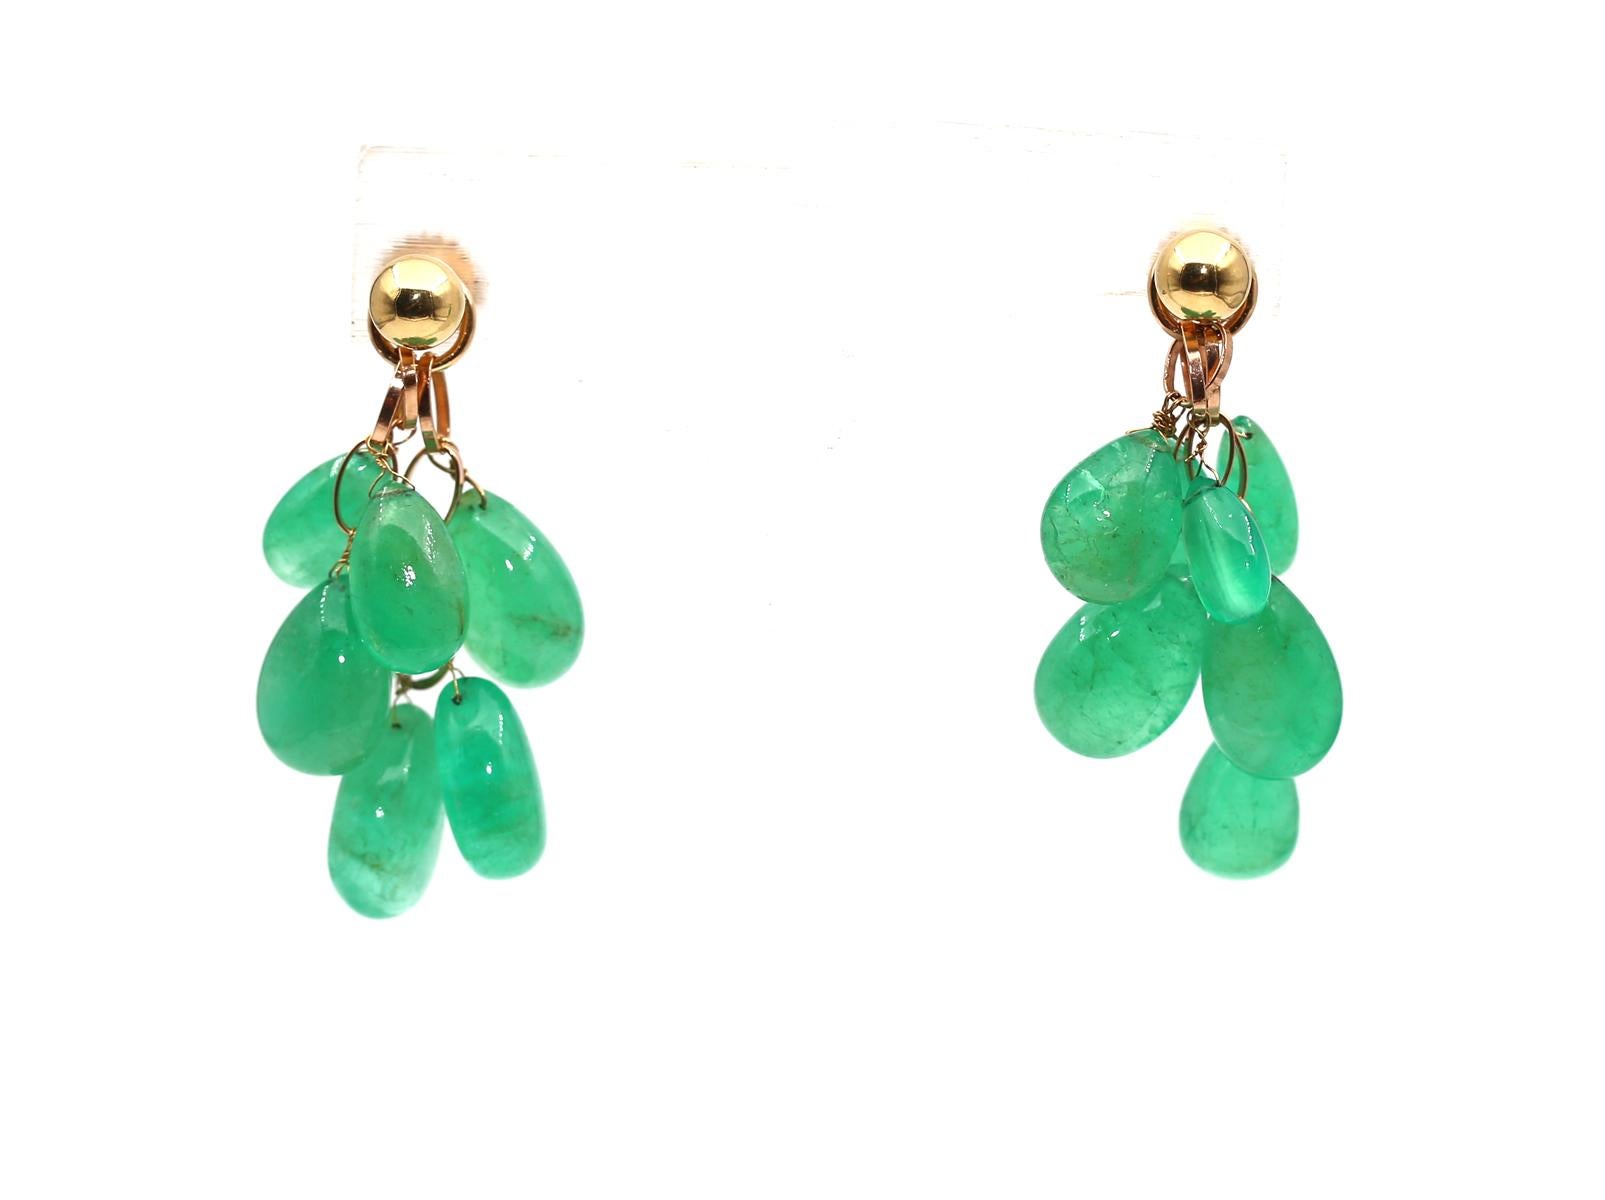 70 Carats Emerald Pear-Shaped Gold Earrings. Created around 1955.

70 Carats of Emeralds freely hanging from the carved Gold ring. The way it moves with the head is just mesmerizing. 
The upper Gold part can be detached and worn separately or even